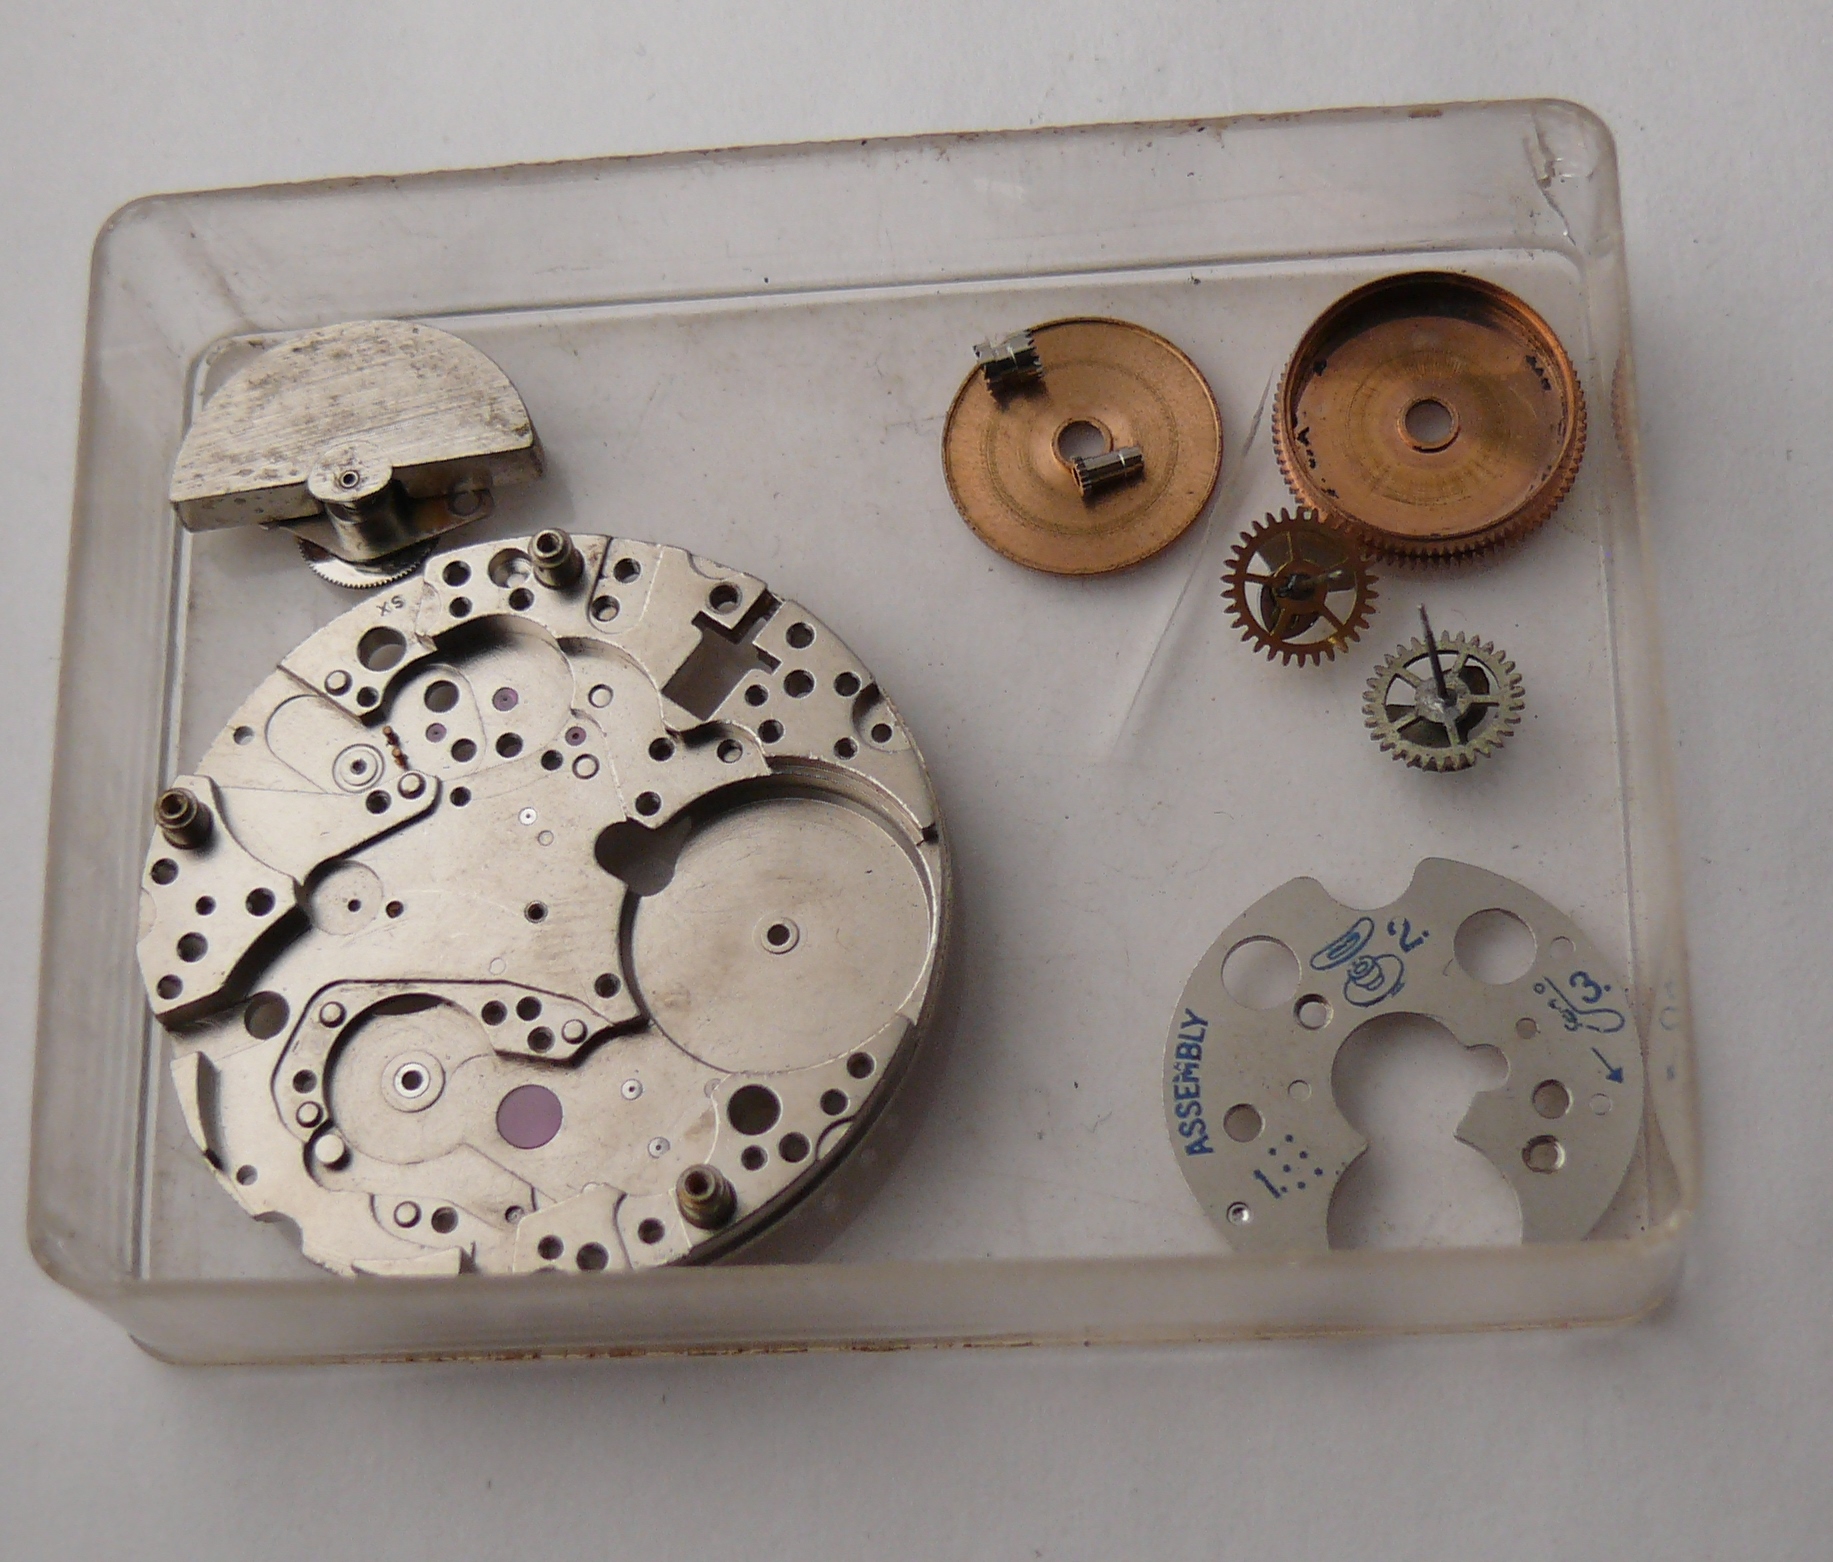 Assorted Vintage Breitling Chronograph Calibre 11 12 Movement Parts Job Lot. Suitable for projects. - Image 2 of 2